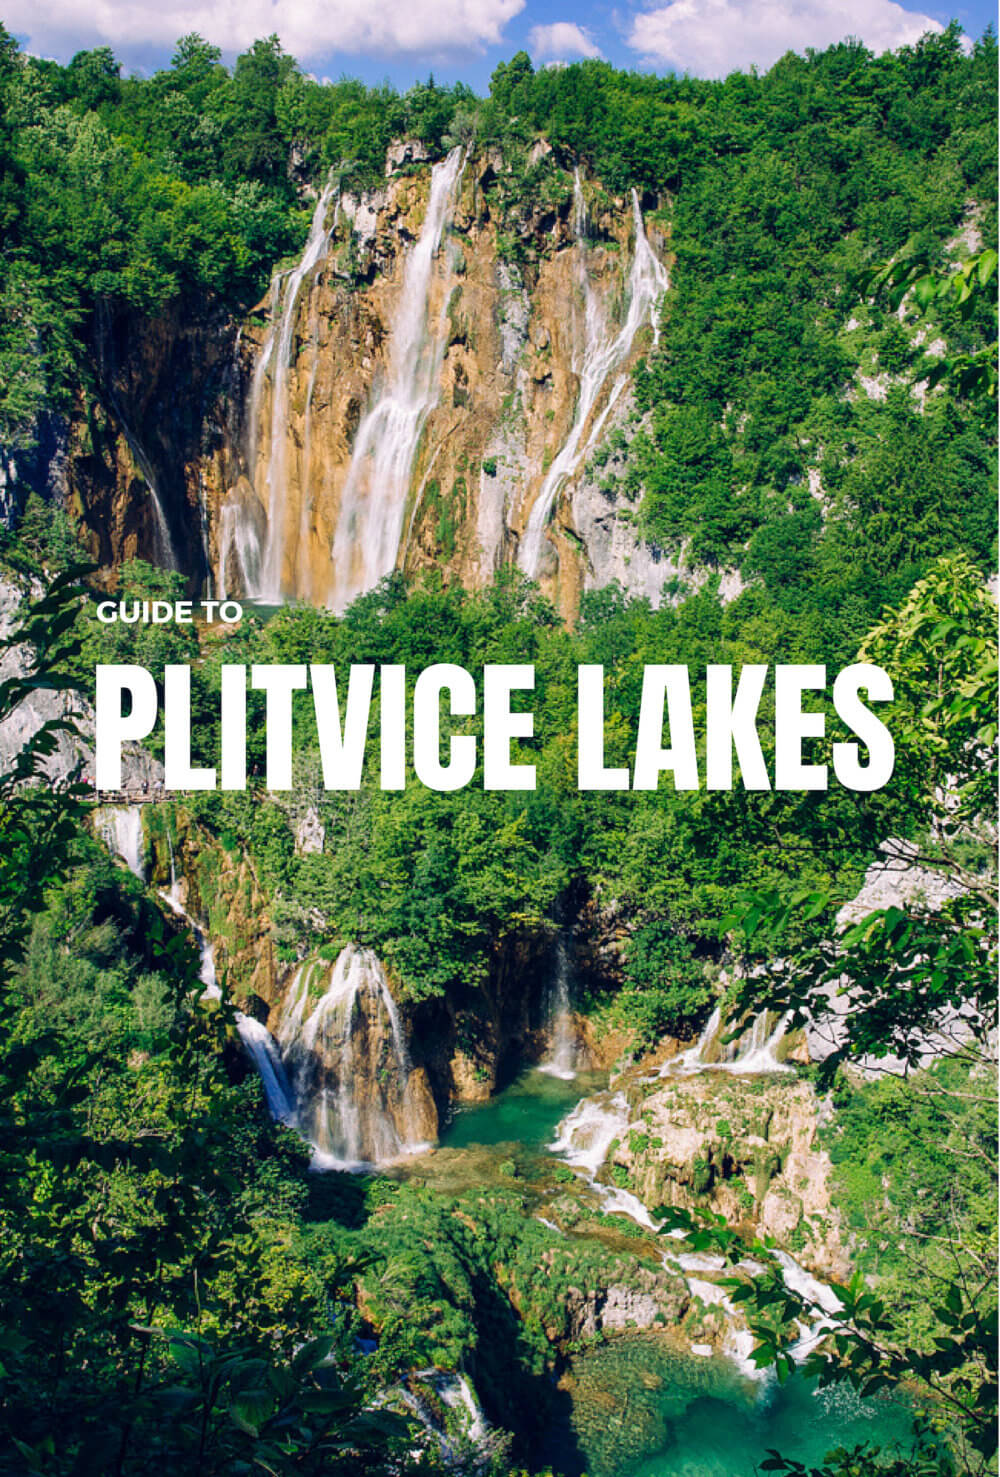 Guide to Plitvice Lakes in Croatia